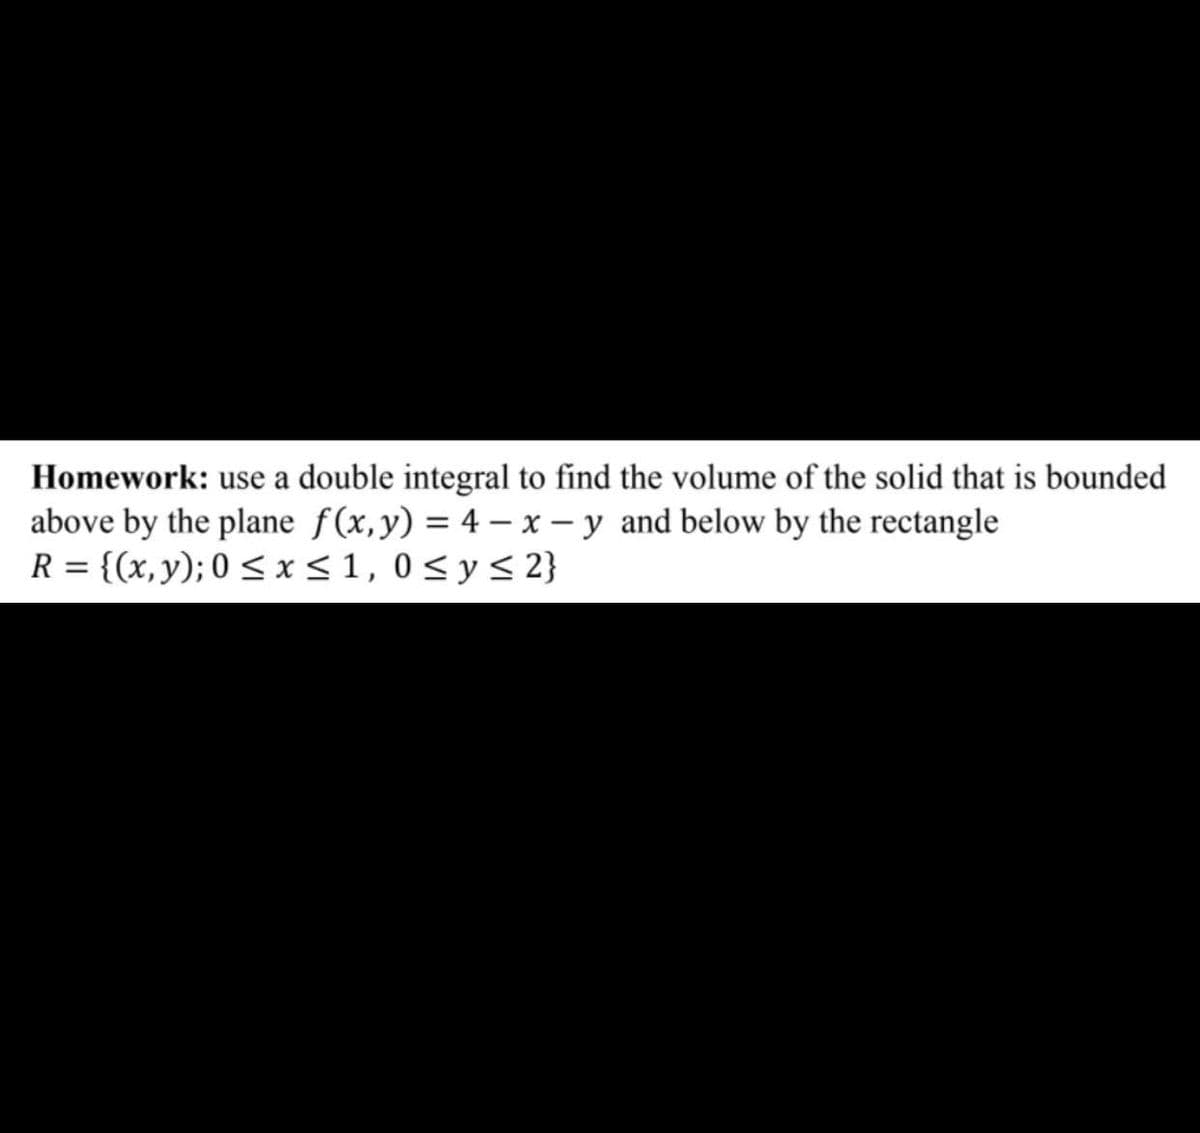 Homework: use a double integral to find the volume of the solid that is bounded
above by the plane f(x,y) = 4 – x – y and below by the rectangle
R = {(x,y); 0 < x<1, 0<y< 2}
